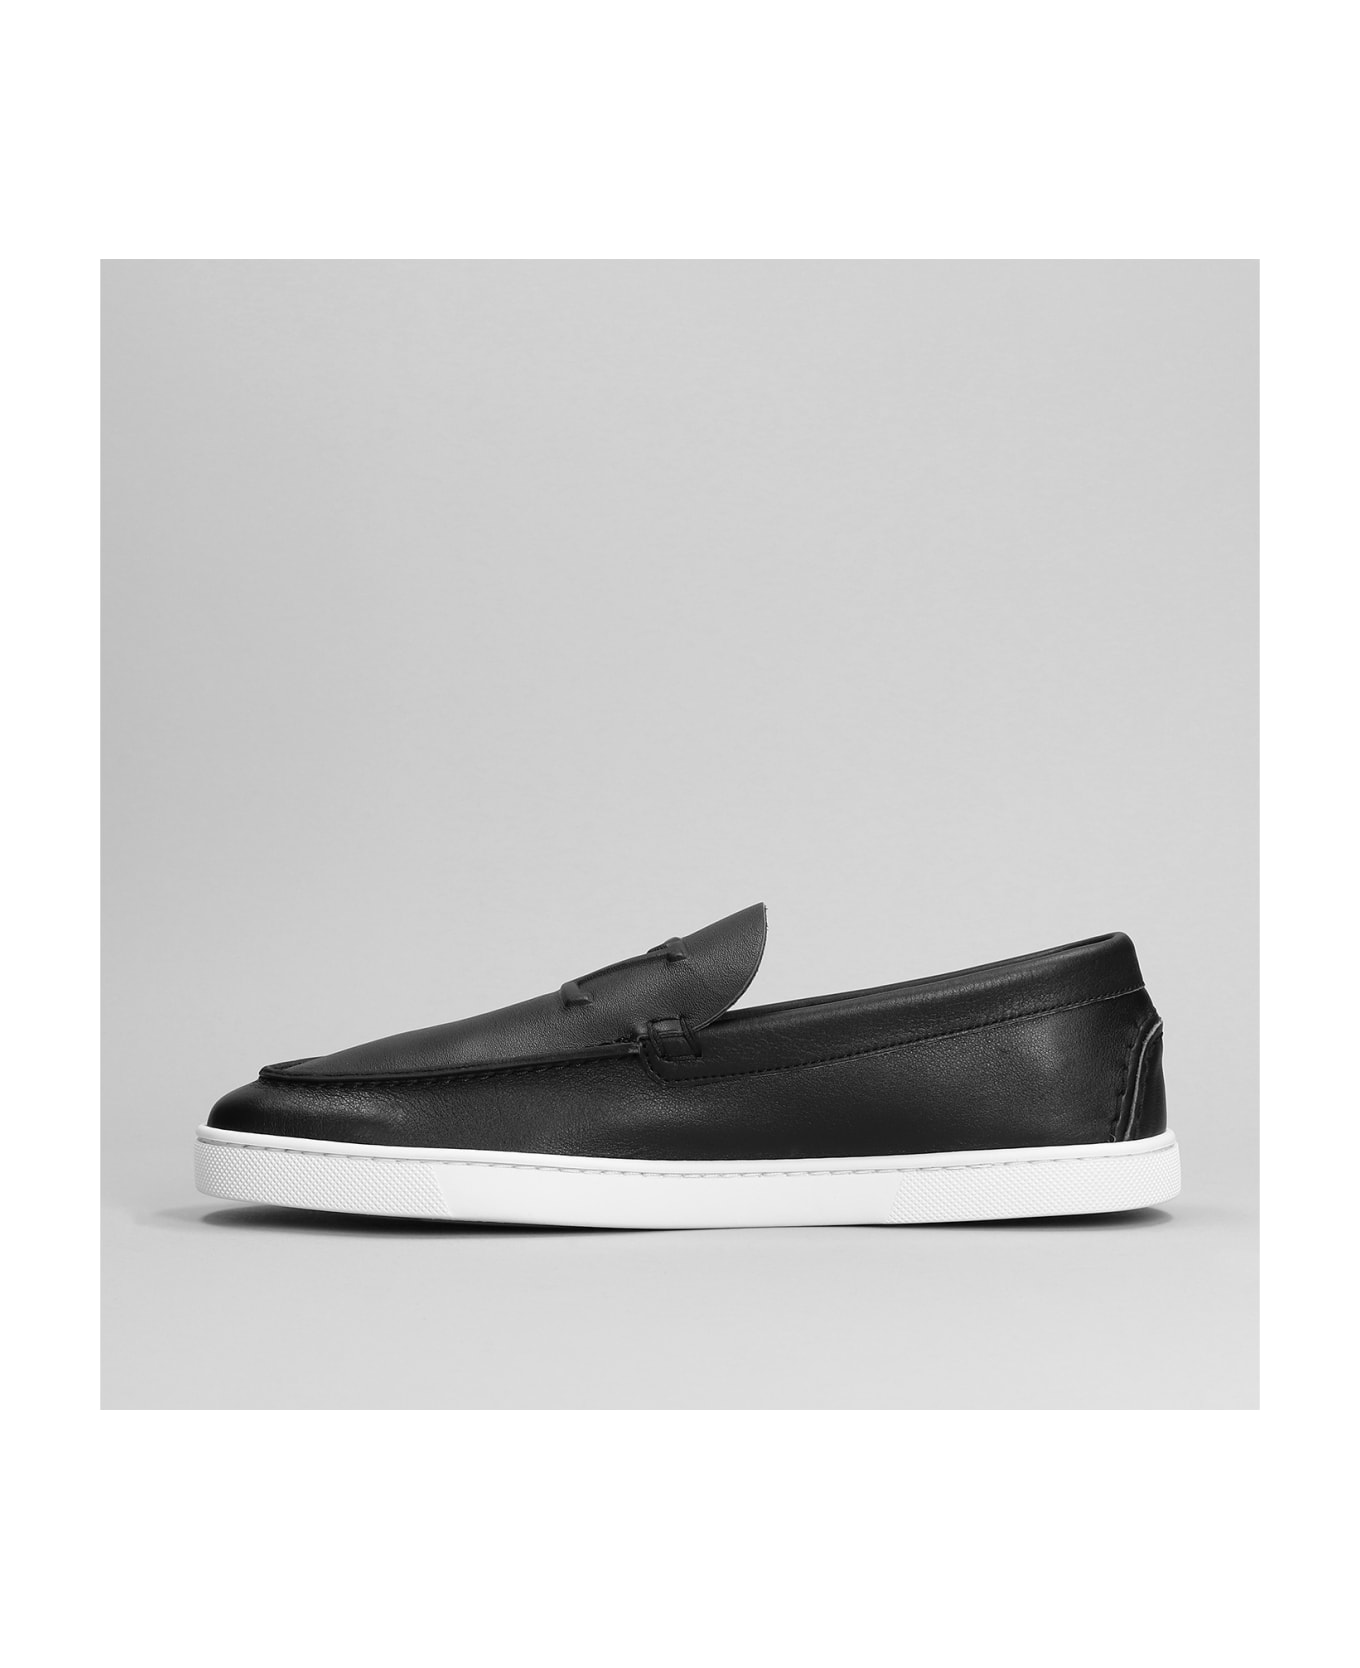 Christian Louboutin Varsiboat Loafers In Black Leather - black